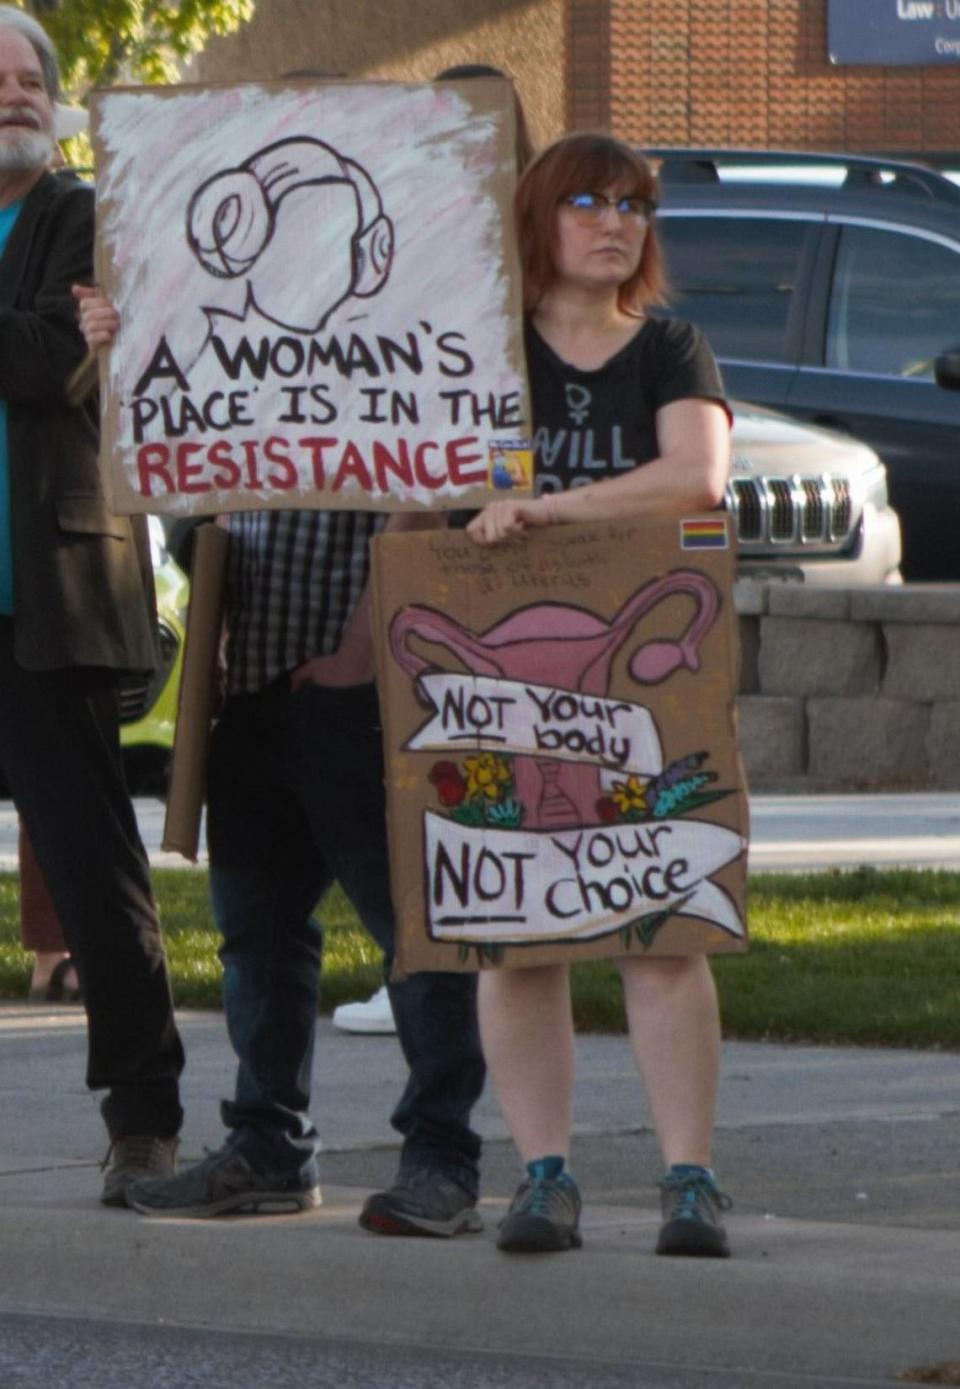 A protester supporting abortion rights at a Richland demonstration holds two signs, one reading “A woman’s place is in the resistance” which is a reference to the late Carrie Fisher and her iconic Star Wars character General Leia Organa. The other reads, “Not your body, not your choice.” Hundreds demonstrated at Jon Dam Plaza in Richland on May 4, 2022.